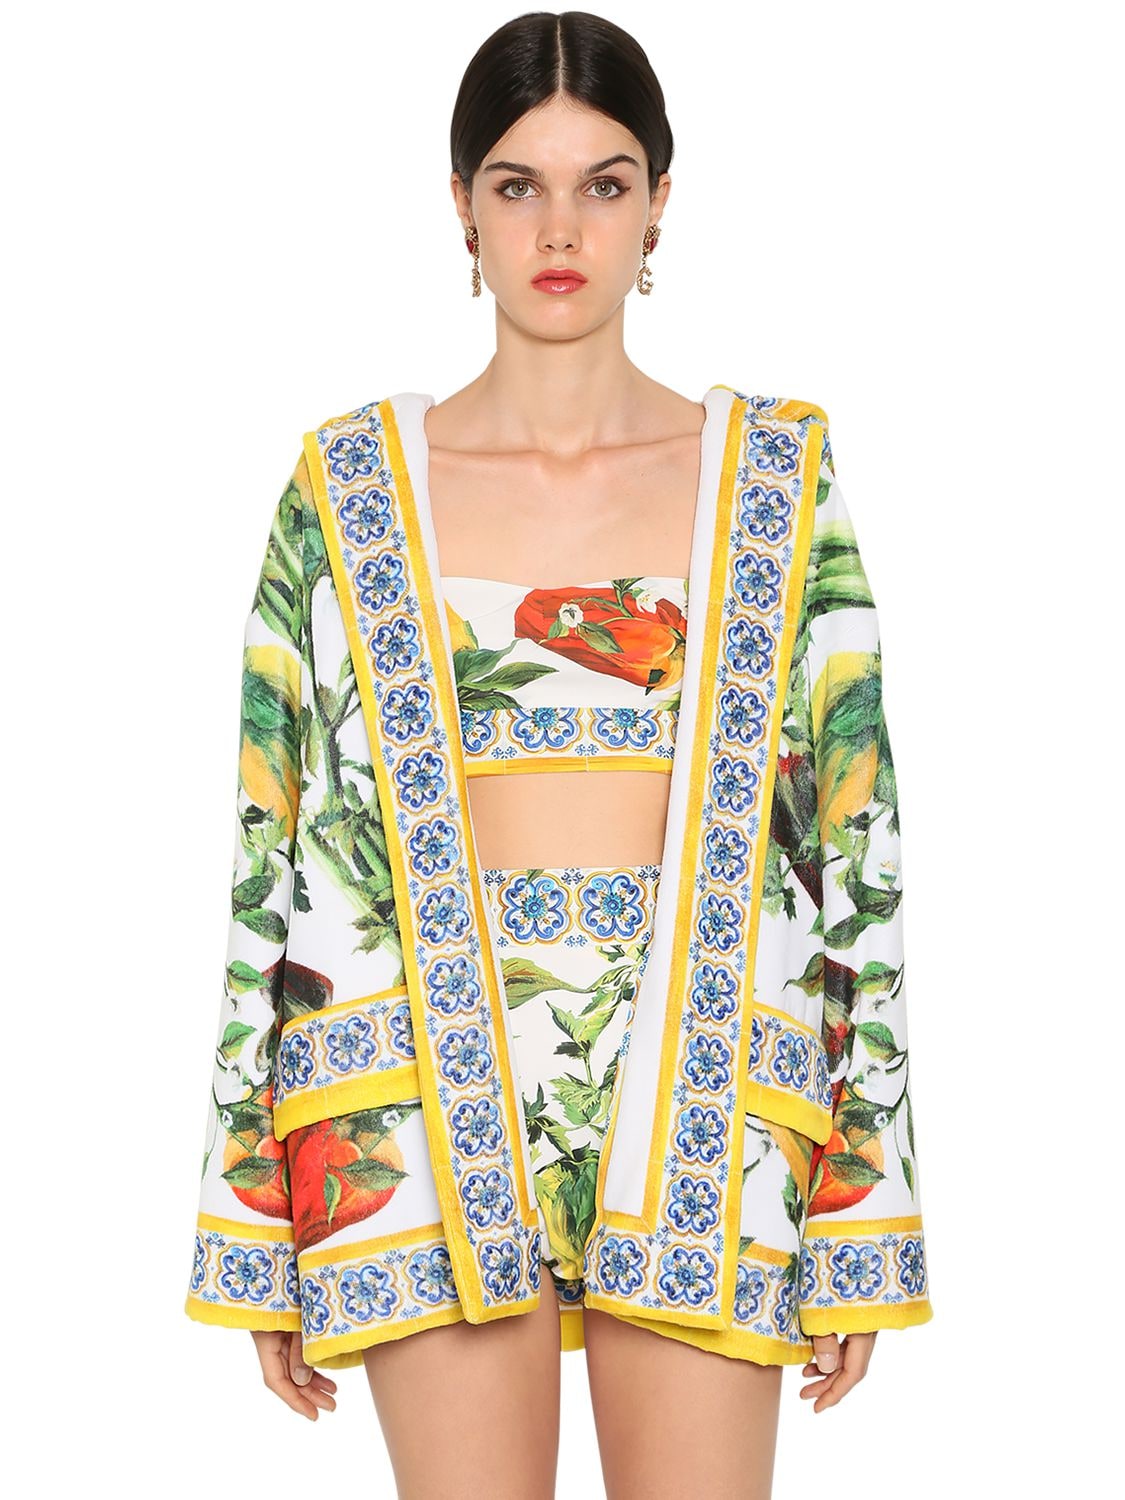 DOLCE & GABBANA PRINTED COTTON TERRY dressing gown,69IG4F025-SEFQNTk1